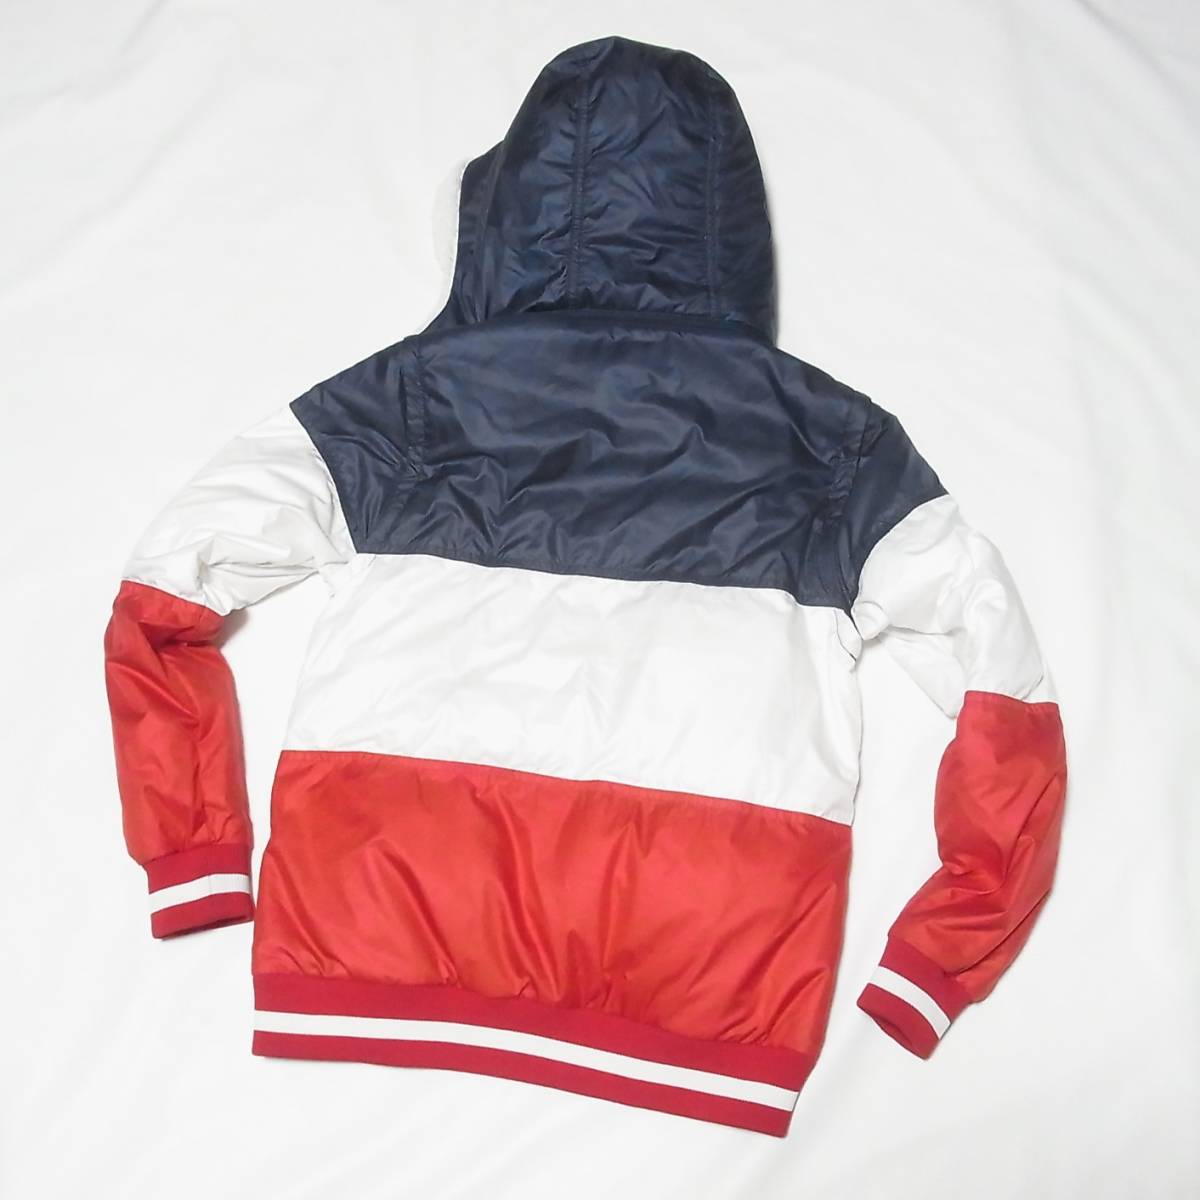  beautiful goods New Balance GOLF tricolor 2WAY down jacket size 0* New balance Golf * down vest * cleaning settled 